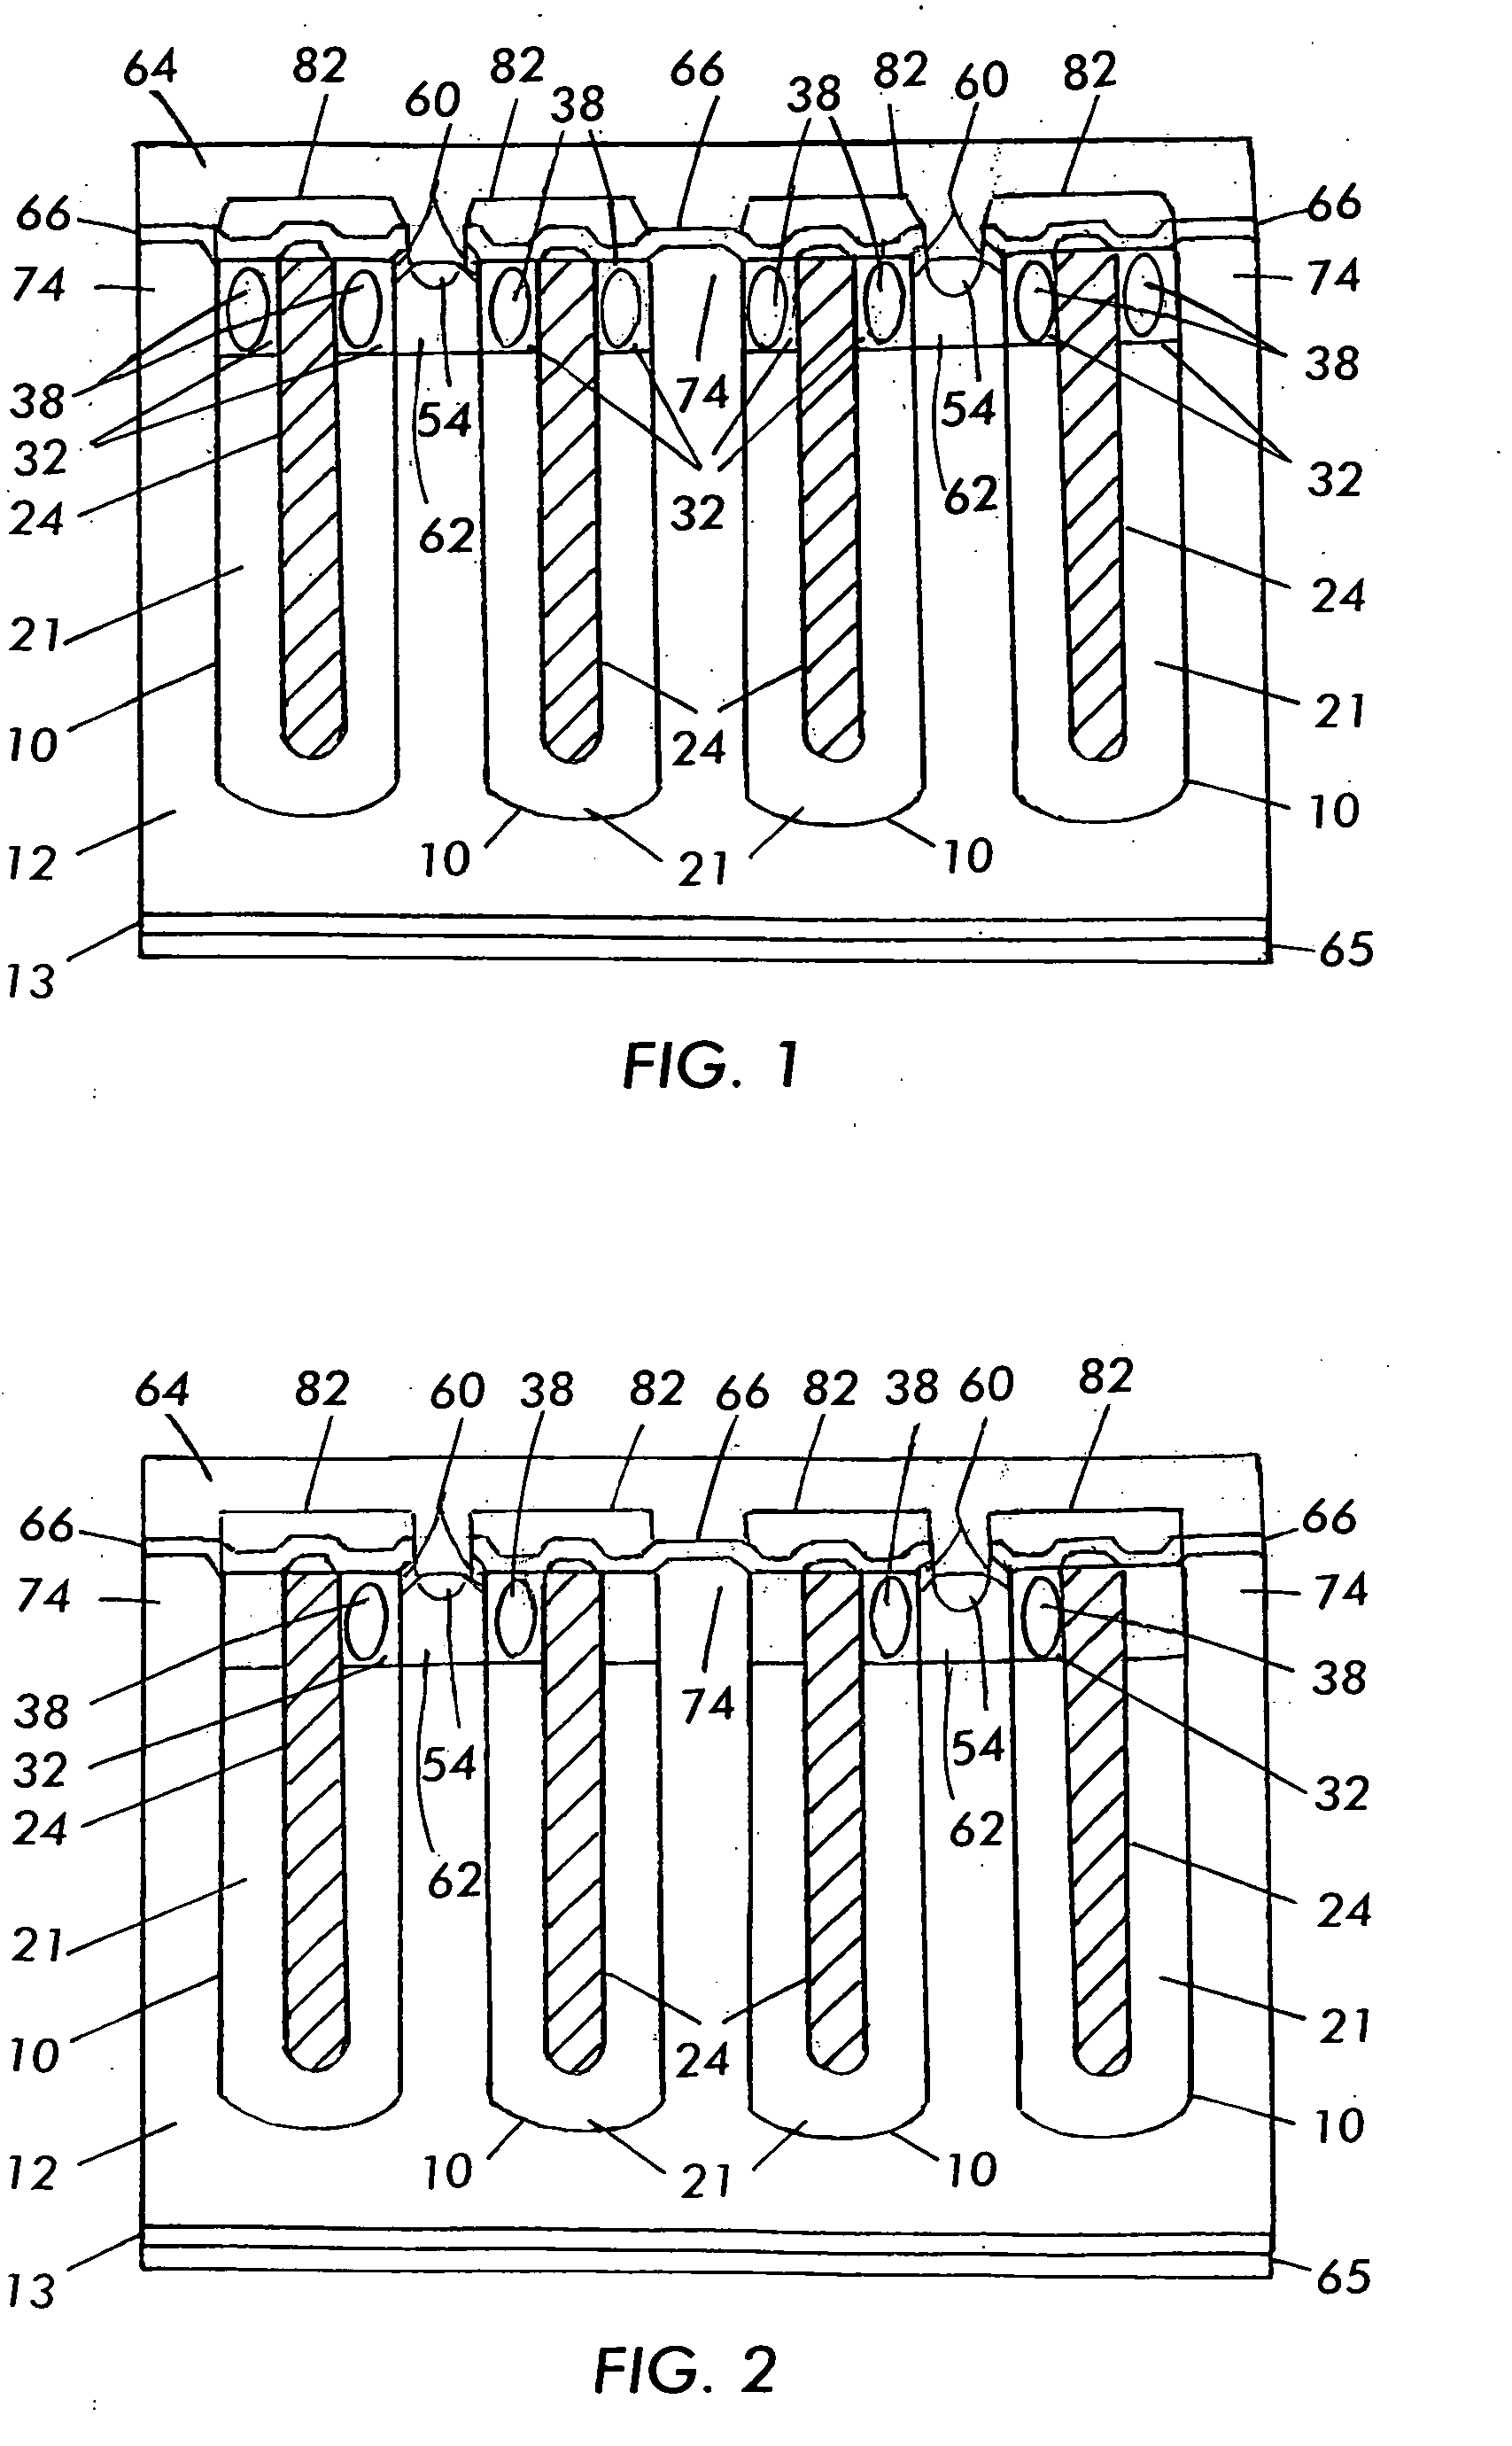 Integrated mosfet and schottky device